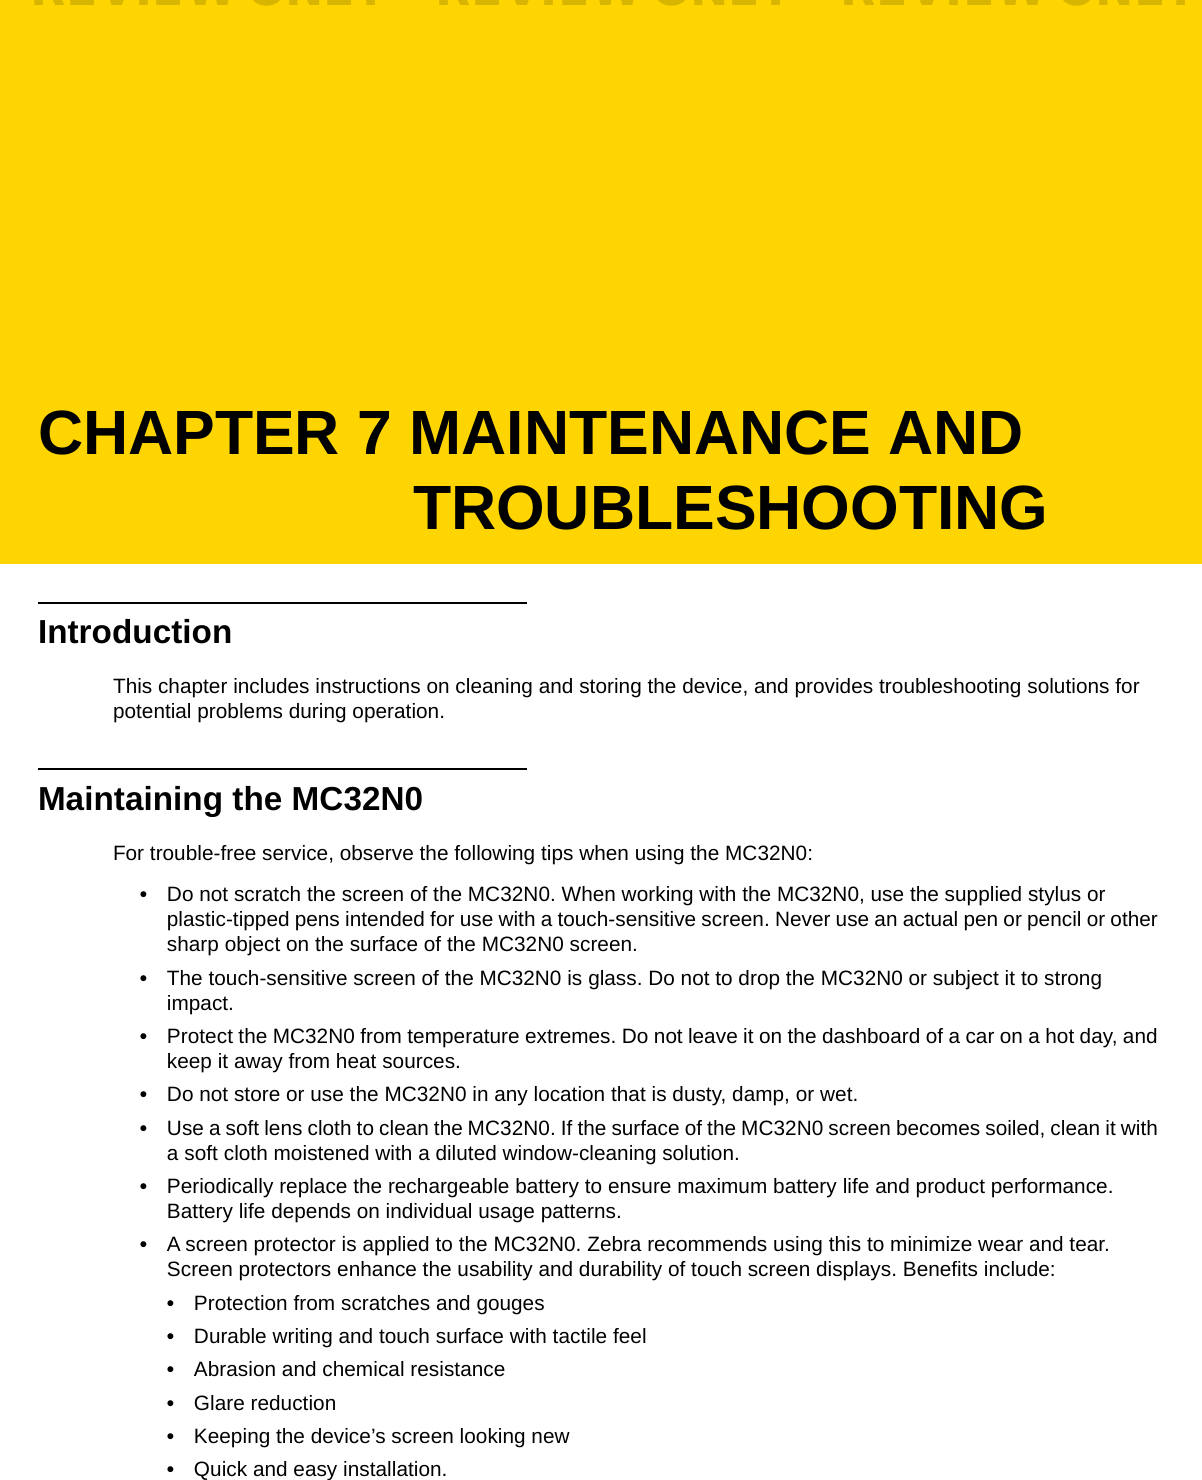 CHAPTER 7 MAINTENANCE AND TROUBLESHOOTINGIntroductionThis chapter includes instructions on cleaning and storing the device, and provides troubleshooting solutions for potential problems during operation.Maintaining the MC32N0For trouble-free service, observe the following tips when using the MC32N0:•Do not scratch the screen of the MC32N0. When working with the MC32N0, use the supplied stylus or plastic-tipped pens intended for use with a touch-sensitive screen. Never use an actual pen or pencil or other sharp object on the surface of the MC32N0 screen.•The touch-sensitive screen of the MC32N0 is glass. Do not to drop the MC32N0 or subject it to strong impact.•Protect the MC32N0 from temperature extremes. Do not leave it on the dashboard of a car on a hot day, and keep it away from heat sources.•Do not store or use the MC32N0 in any location that is dusty, damp, or wet.•Use a soft lens cloth to clean the MC32N0. If the surface of the MC32N0 screen becomes soiled, clean it with a soft cloth moistened with a diluted window-cleaning solution.•Periodically replace the rechargeable battery to ensure maximum battery life and product performance. Battery life depends on individual usage patterns.•A screen protector is applied to the MC32N0. Zebra recommends using this to minimize wear and tear. Screen protectors enhance the usability and durability of touch screen displays. Benefits include:•Protection from scratches and gouges•Durable writing and touch surface with tactile feel•Abrasion and chemical resistance•Glare reduction•Keeping the device’s screen looking new•Quick and easy installation.REVIEW ONLY - REVIEW ONLY - REVIEW ONLY                             REVIEW ONLY - REVIEW ONLY - REVIEW ONLY